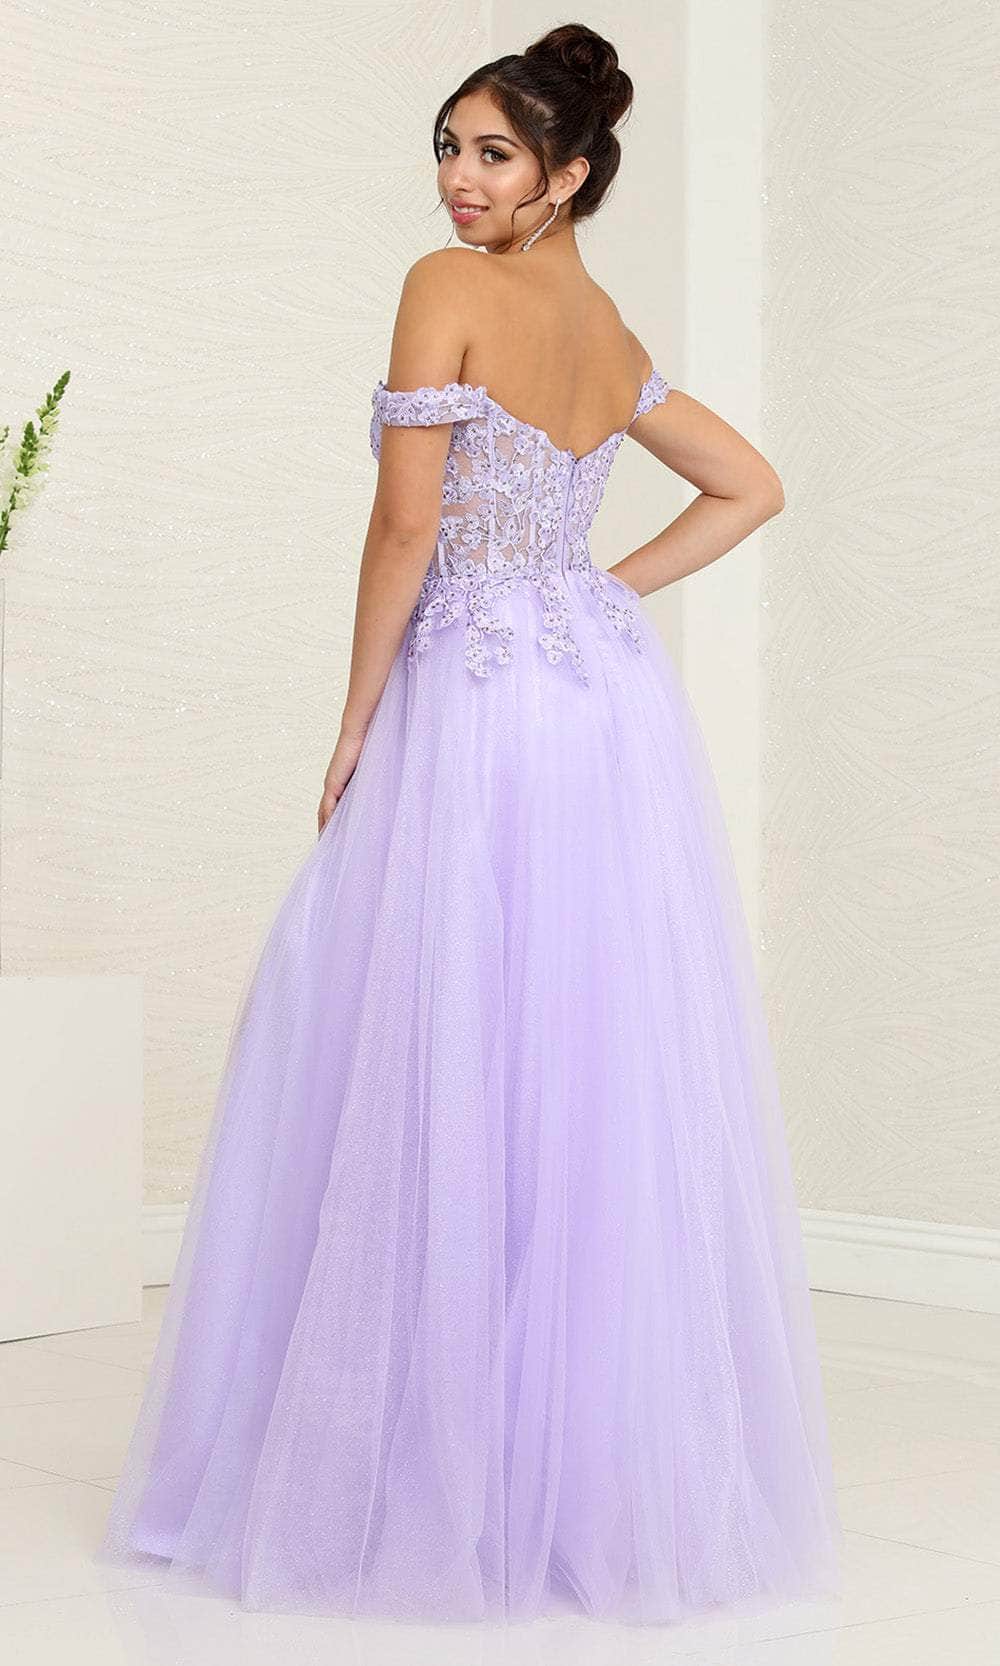 May Queen MQ2053 - Sweetheart Embellished Prom Gown Prom Dresses